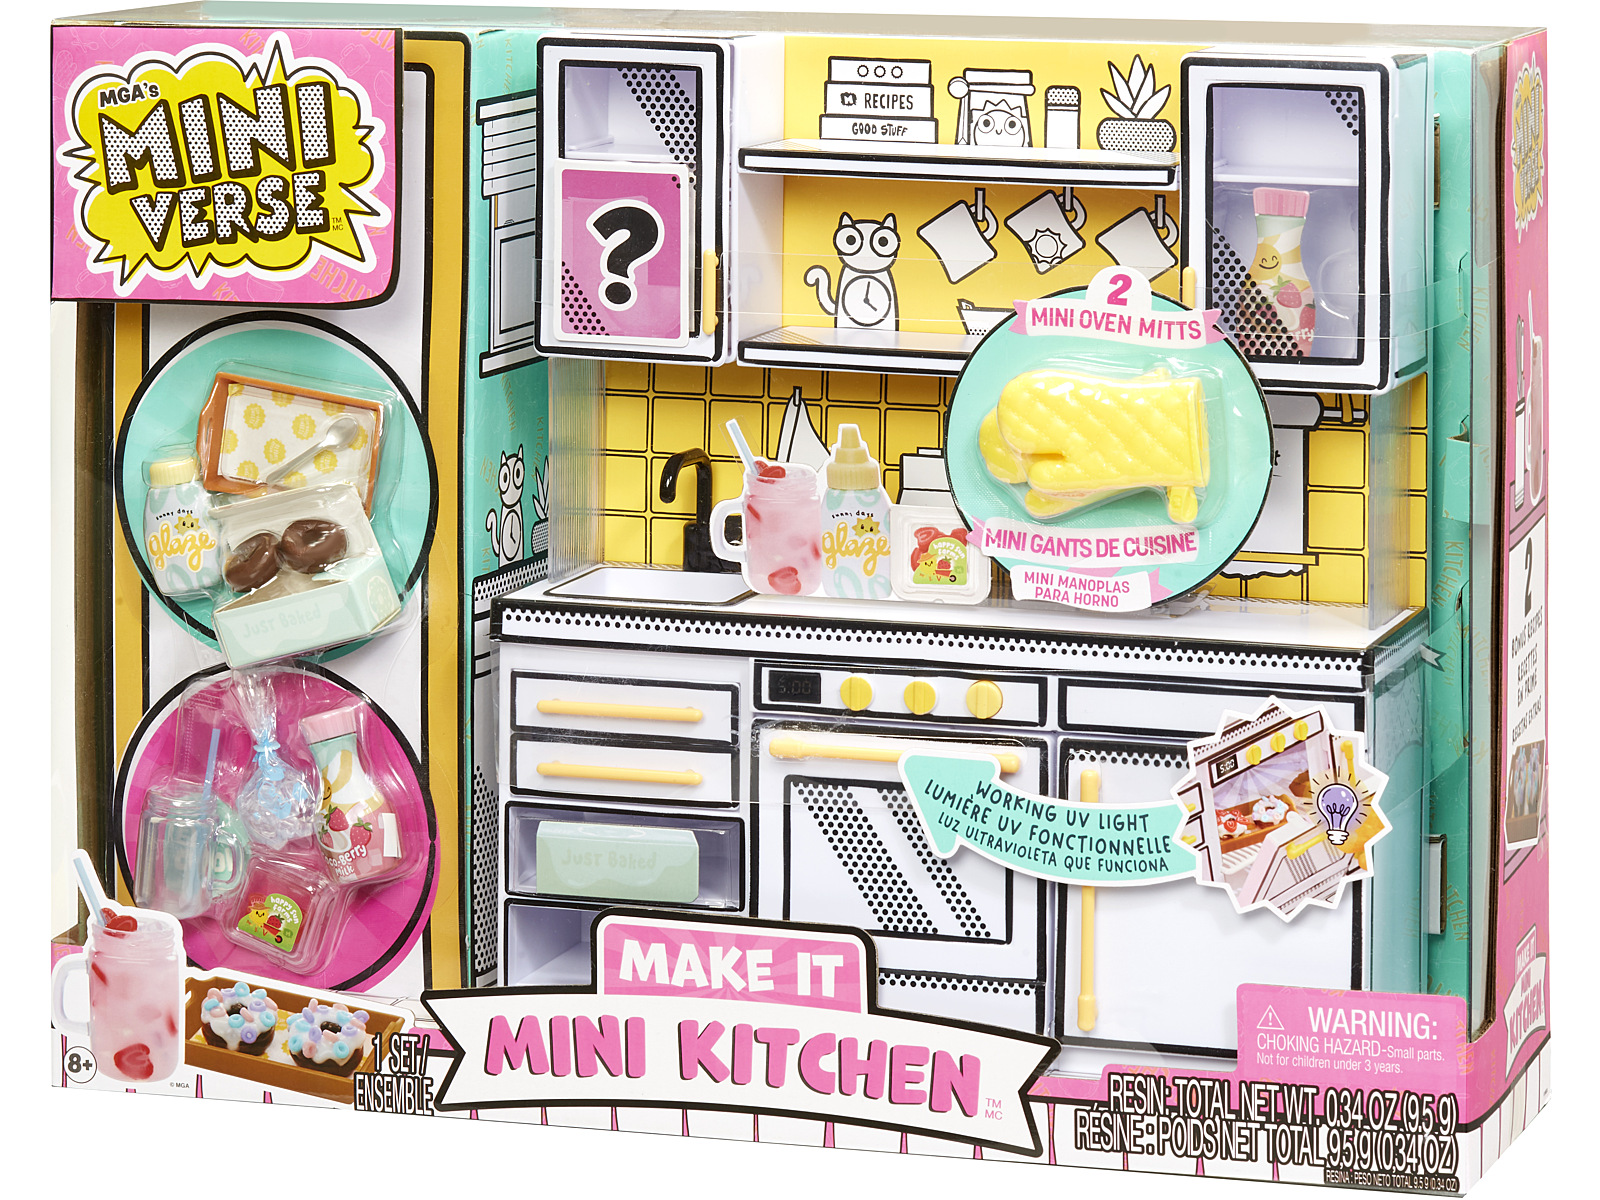  MGA's Miniverse Make It Mini Kitchen, Kitchen Playset, w/ UV  Light, Collectibles, DIY, Resin Play, Exclusive, Mystery Recipe, Mini Oven  Mitts, NOT EDIBLE, 8+ : Toys & Games